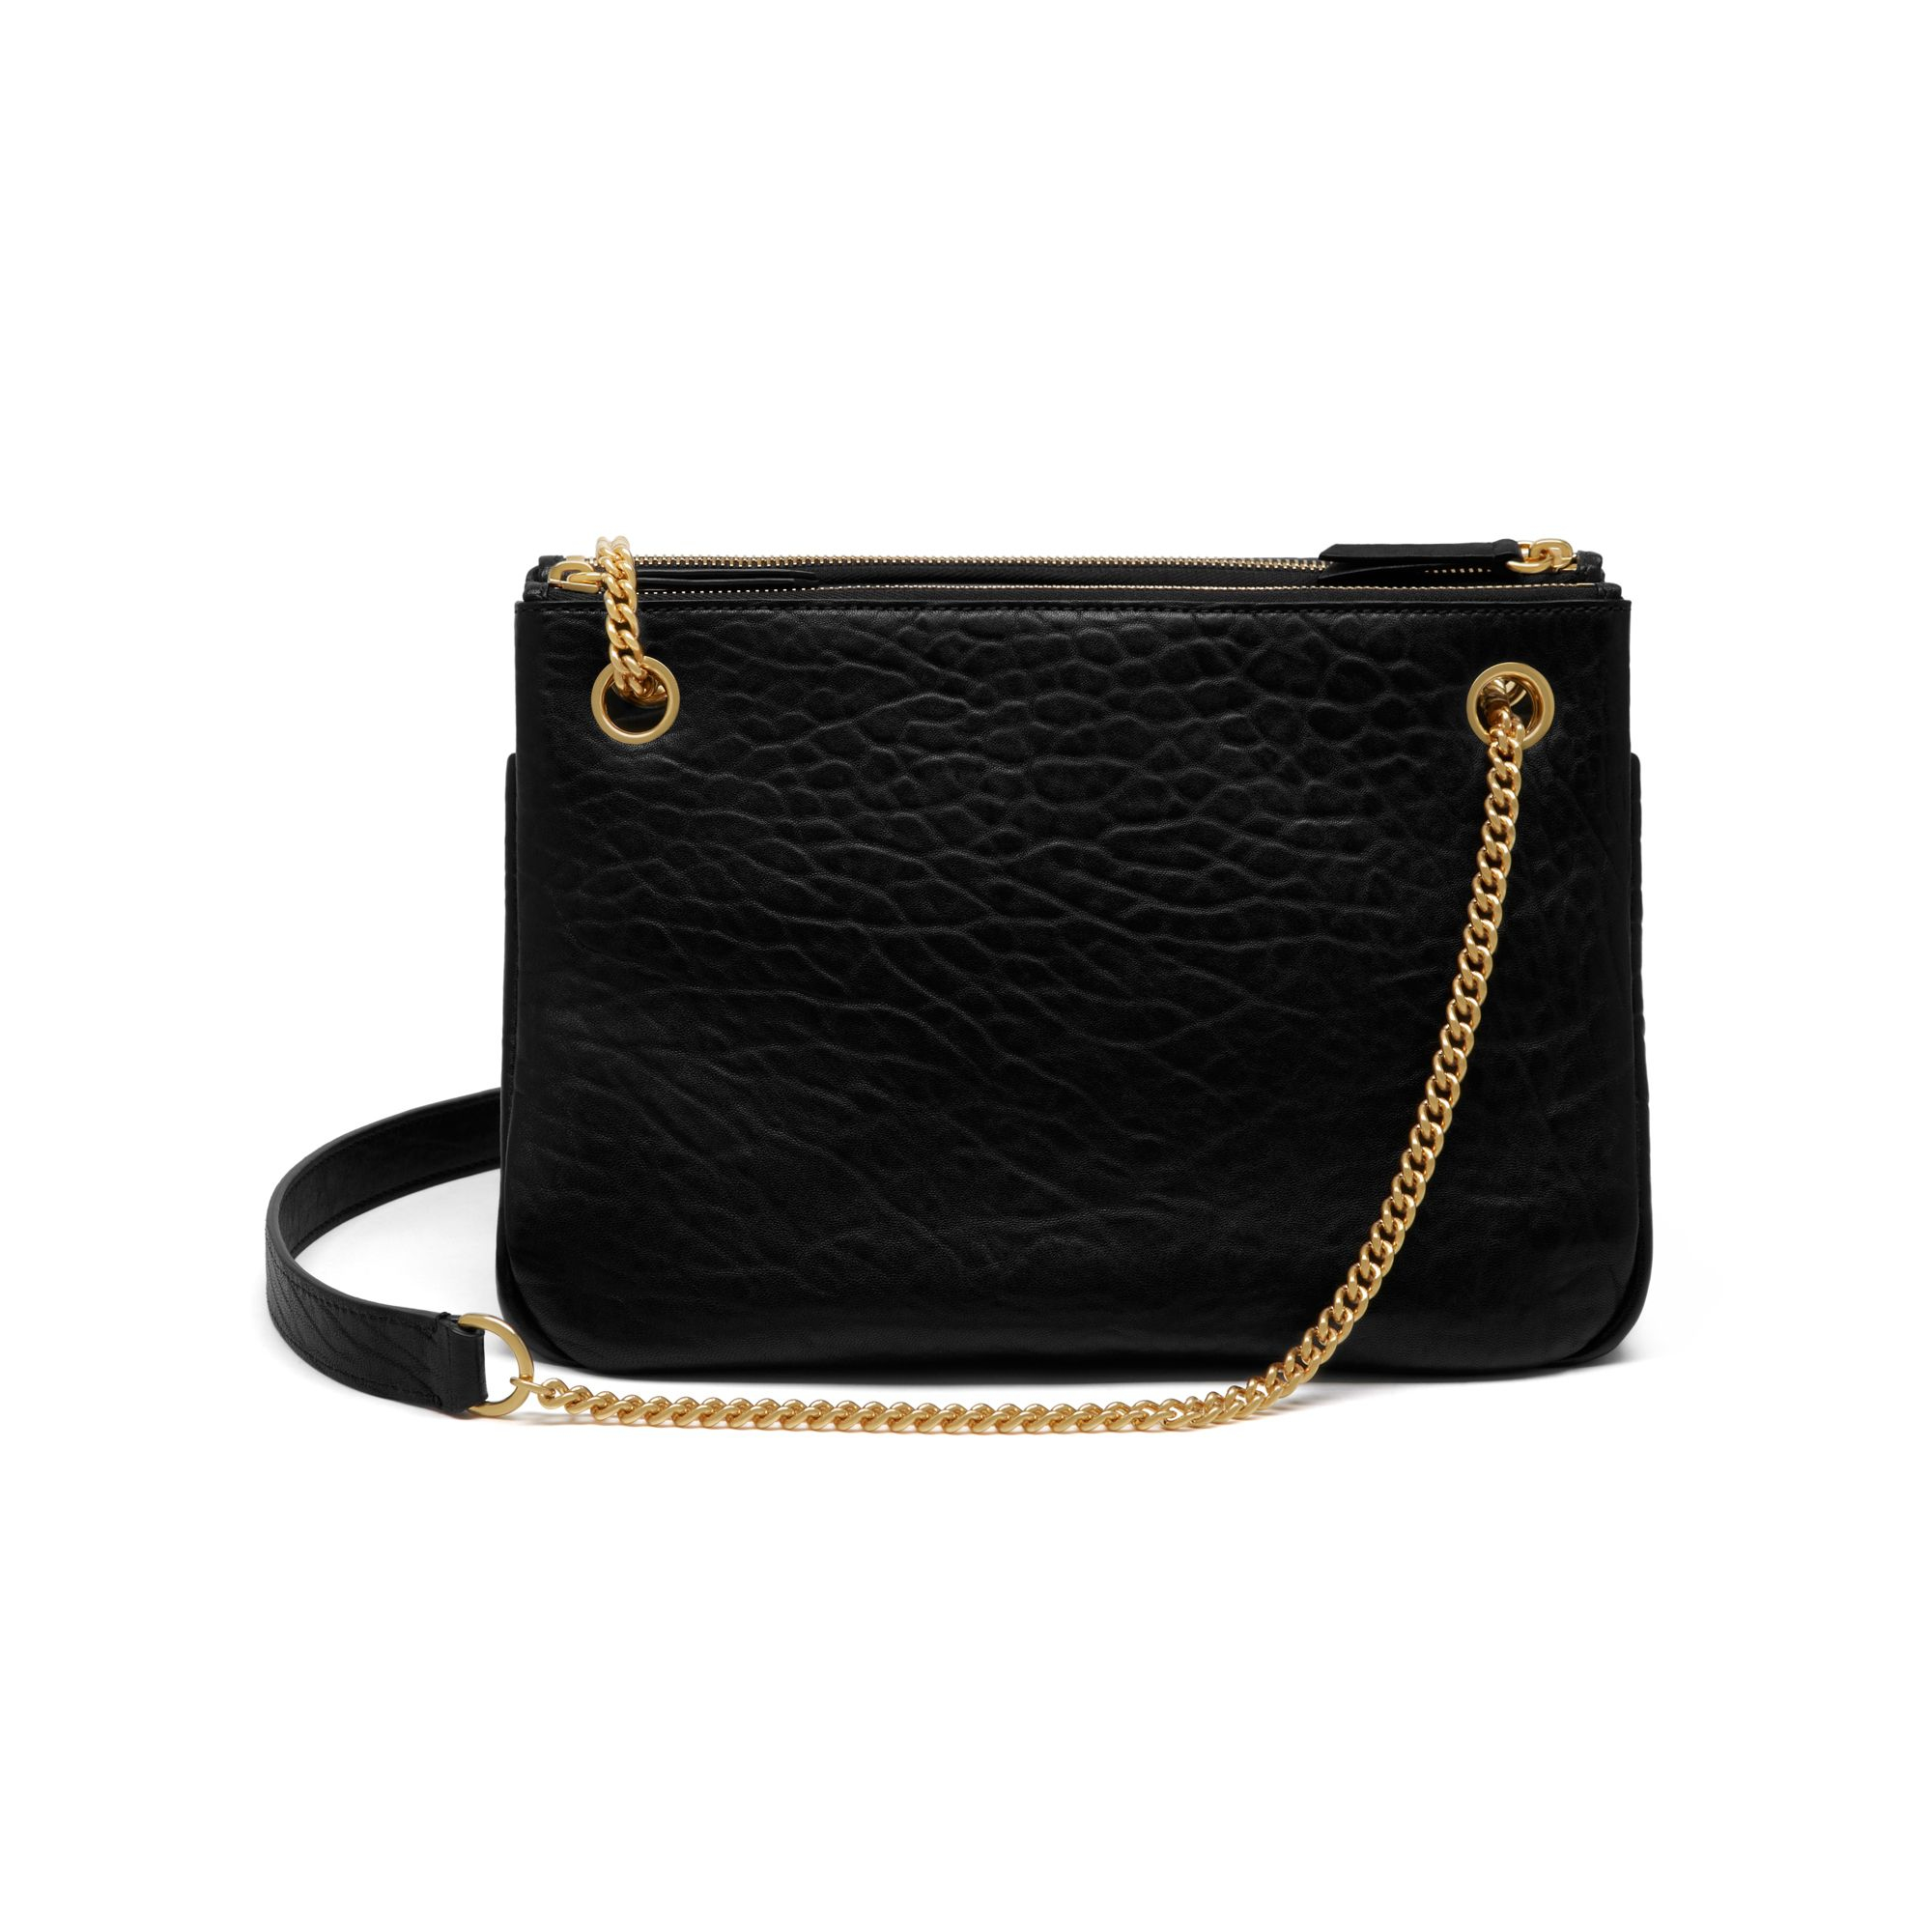 Mulberry Winsley Leather Bag in Black - Lyst